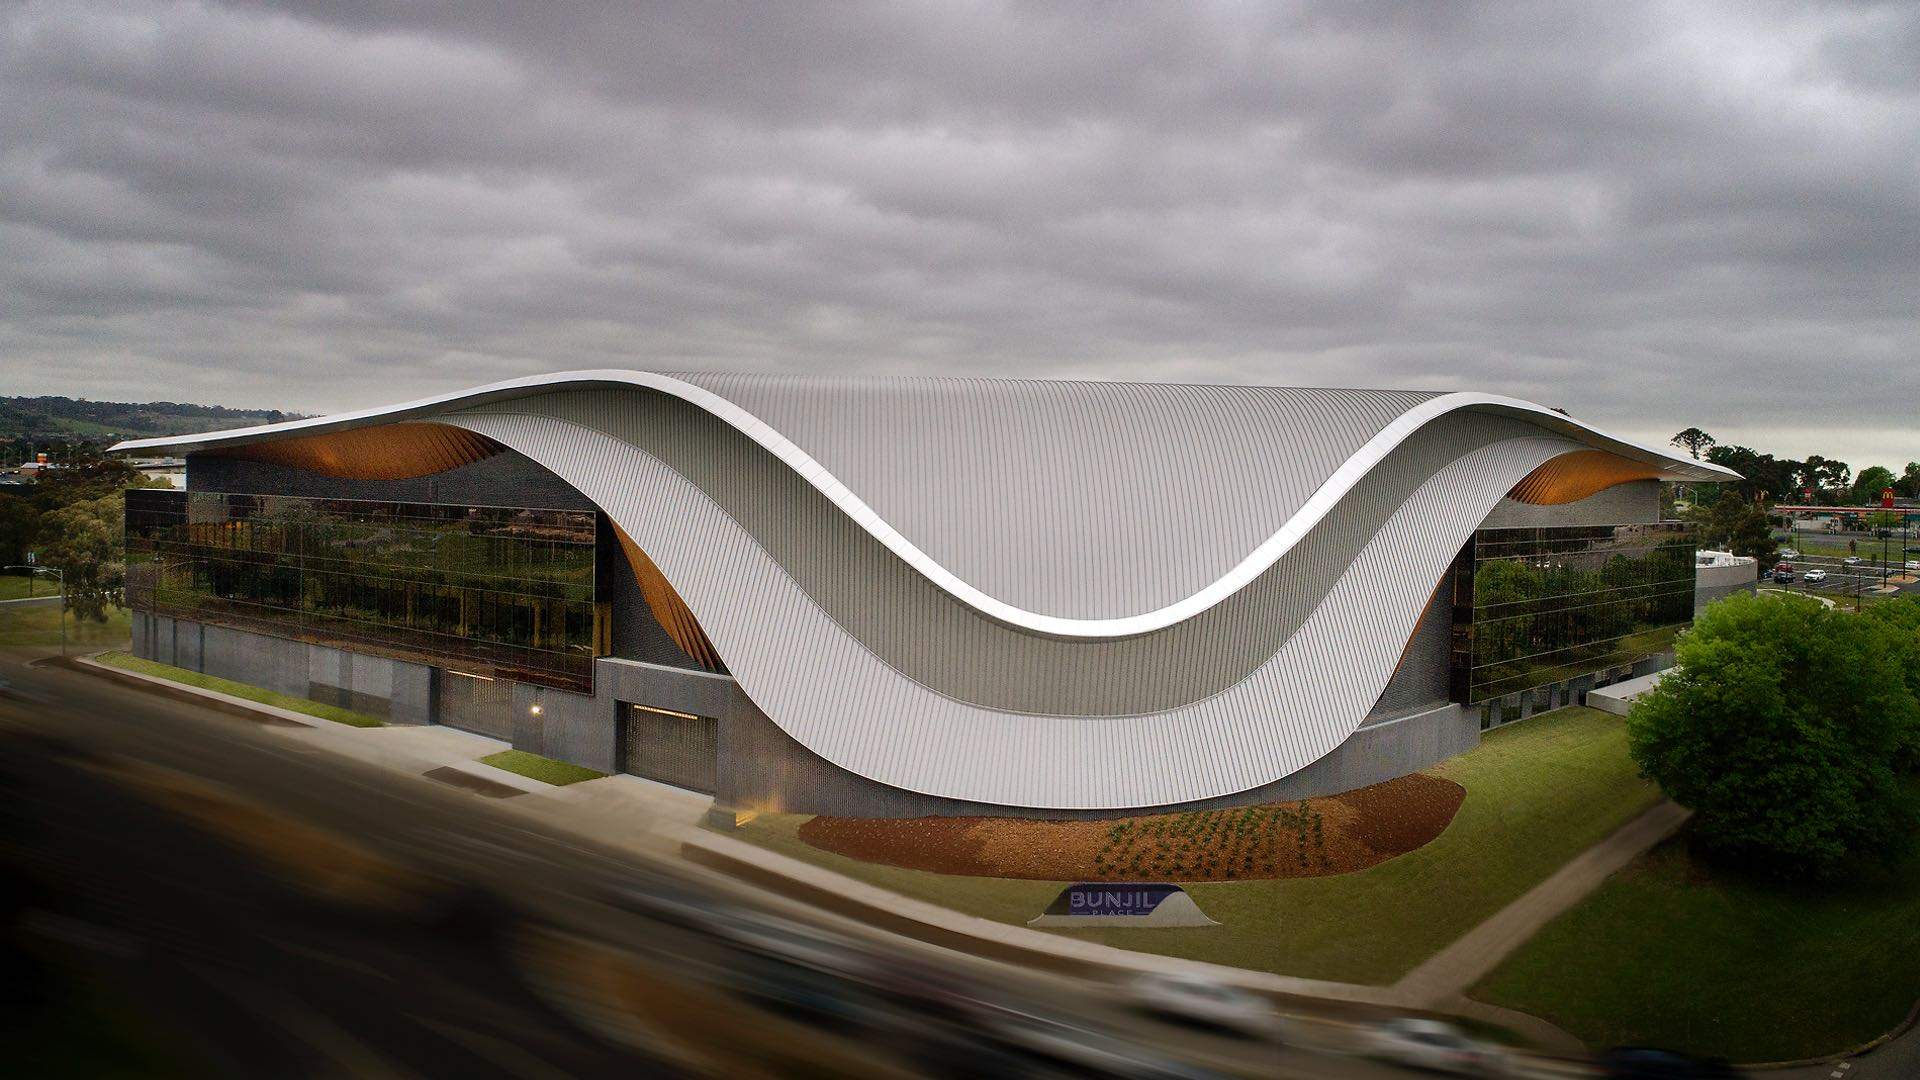 This Melbourne Arts Centre Just Took Out Top Honours at the International Design Awards